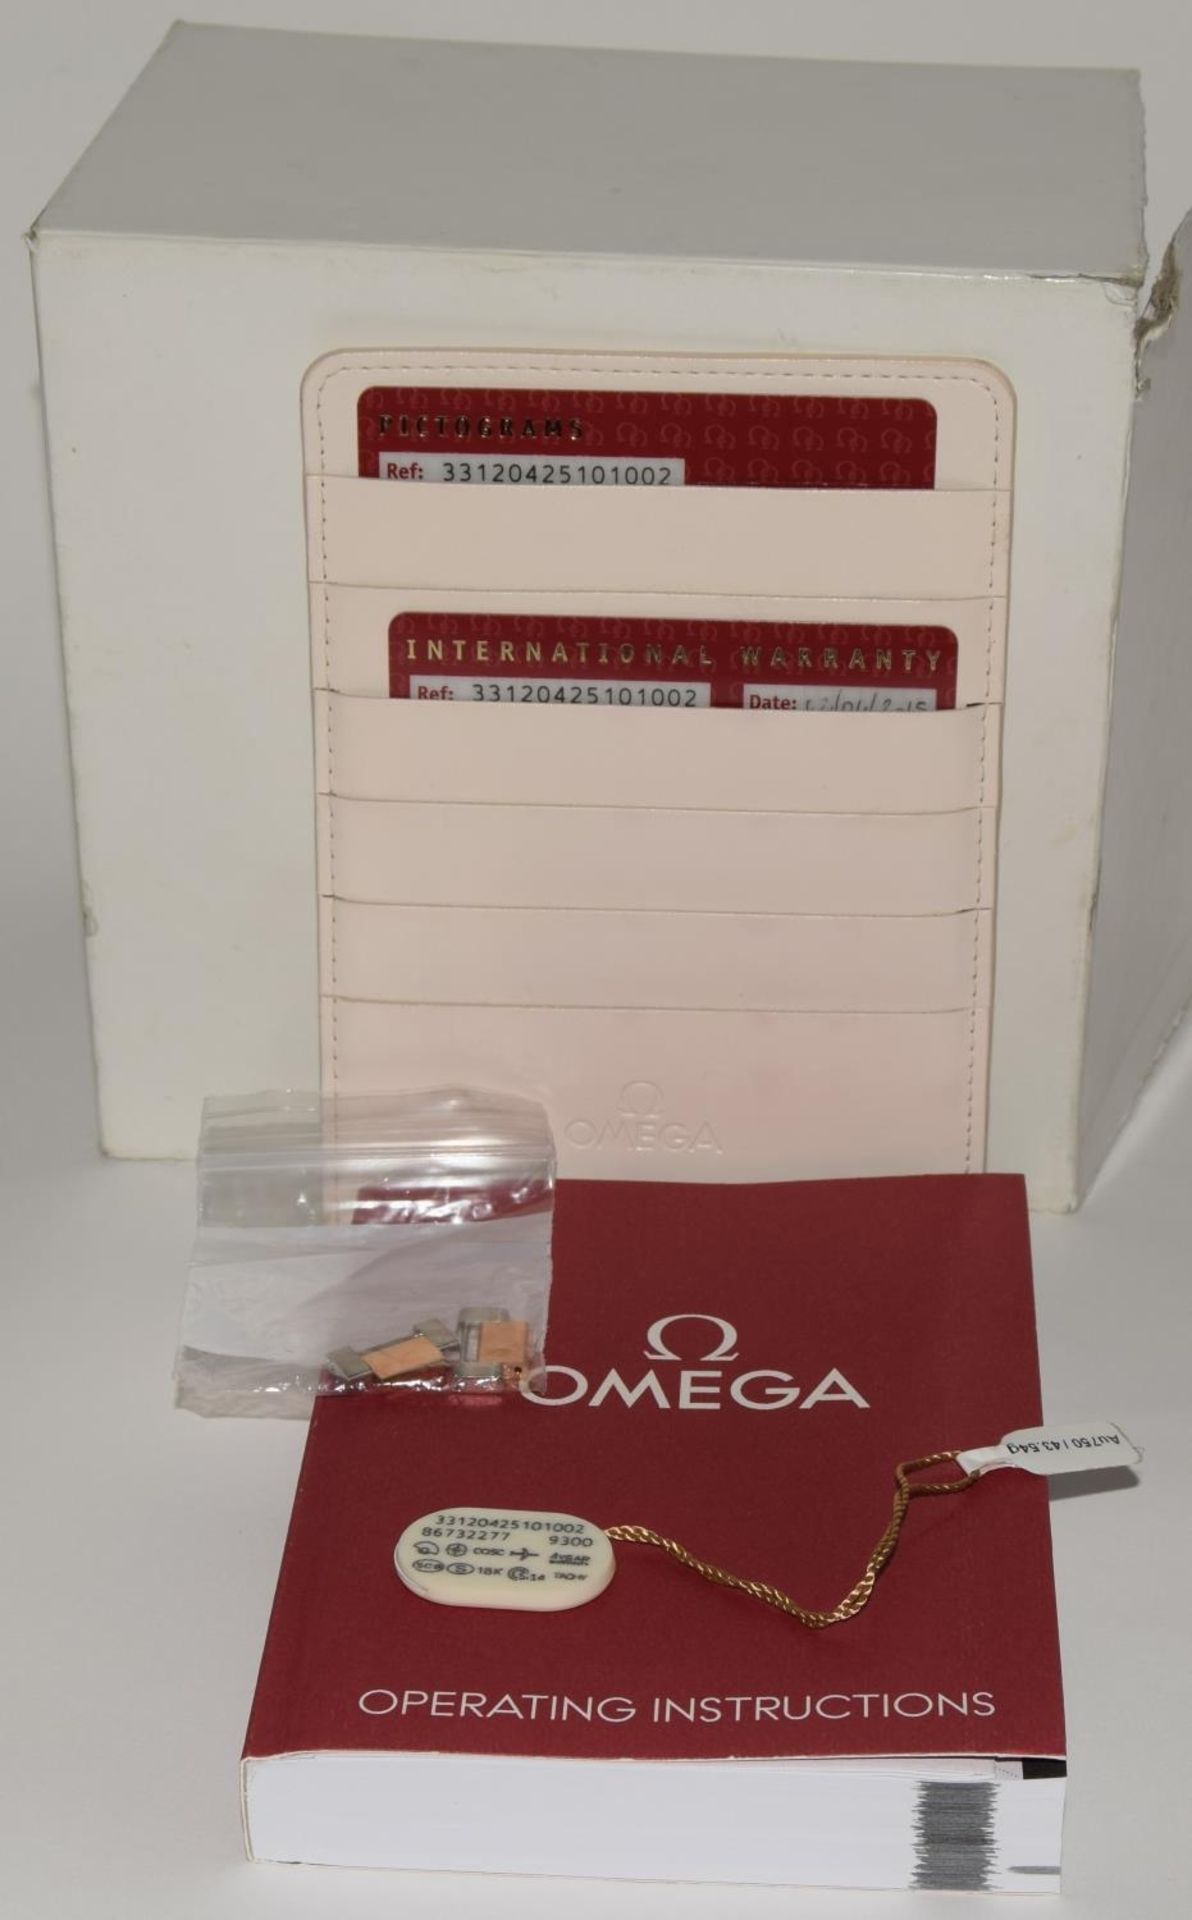 Omega Speedmaster Bi-Metal chronograph ref 33120425101002, Box and Papers. (ref 68) - Image 9 of 9